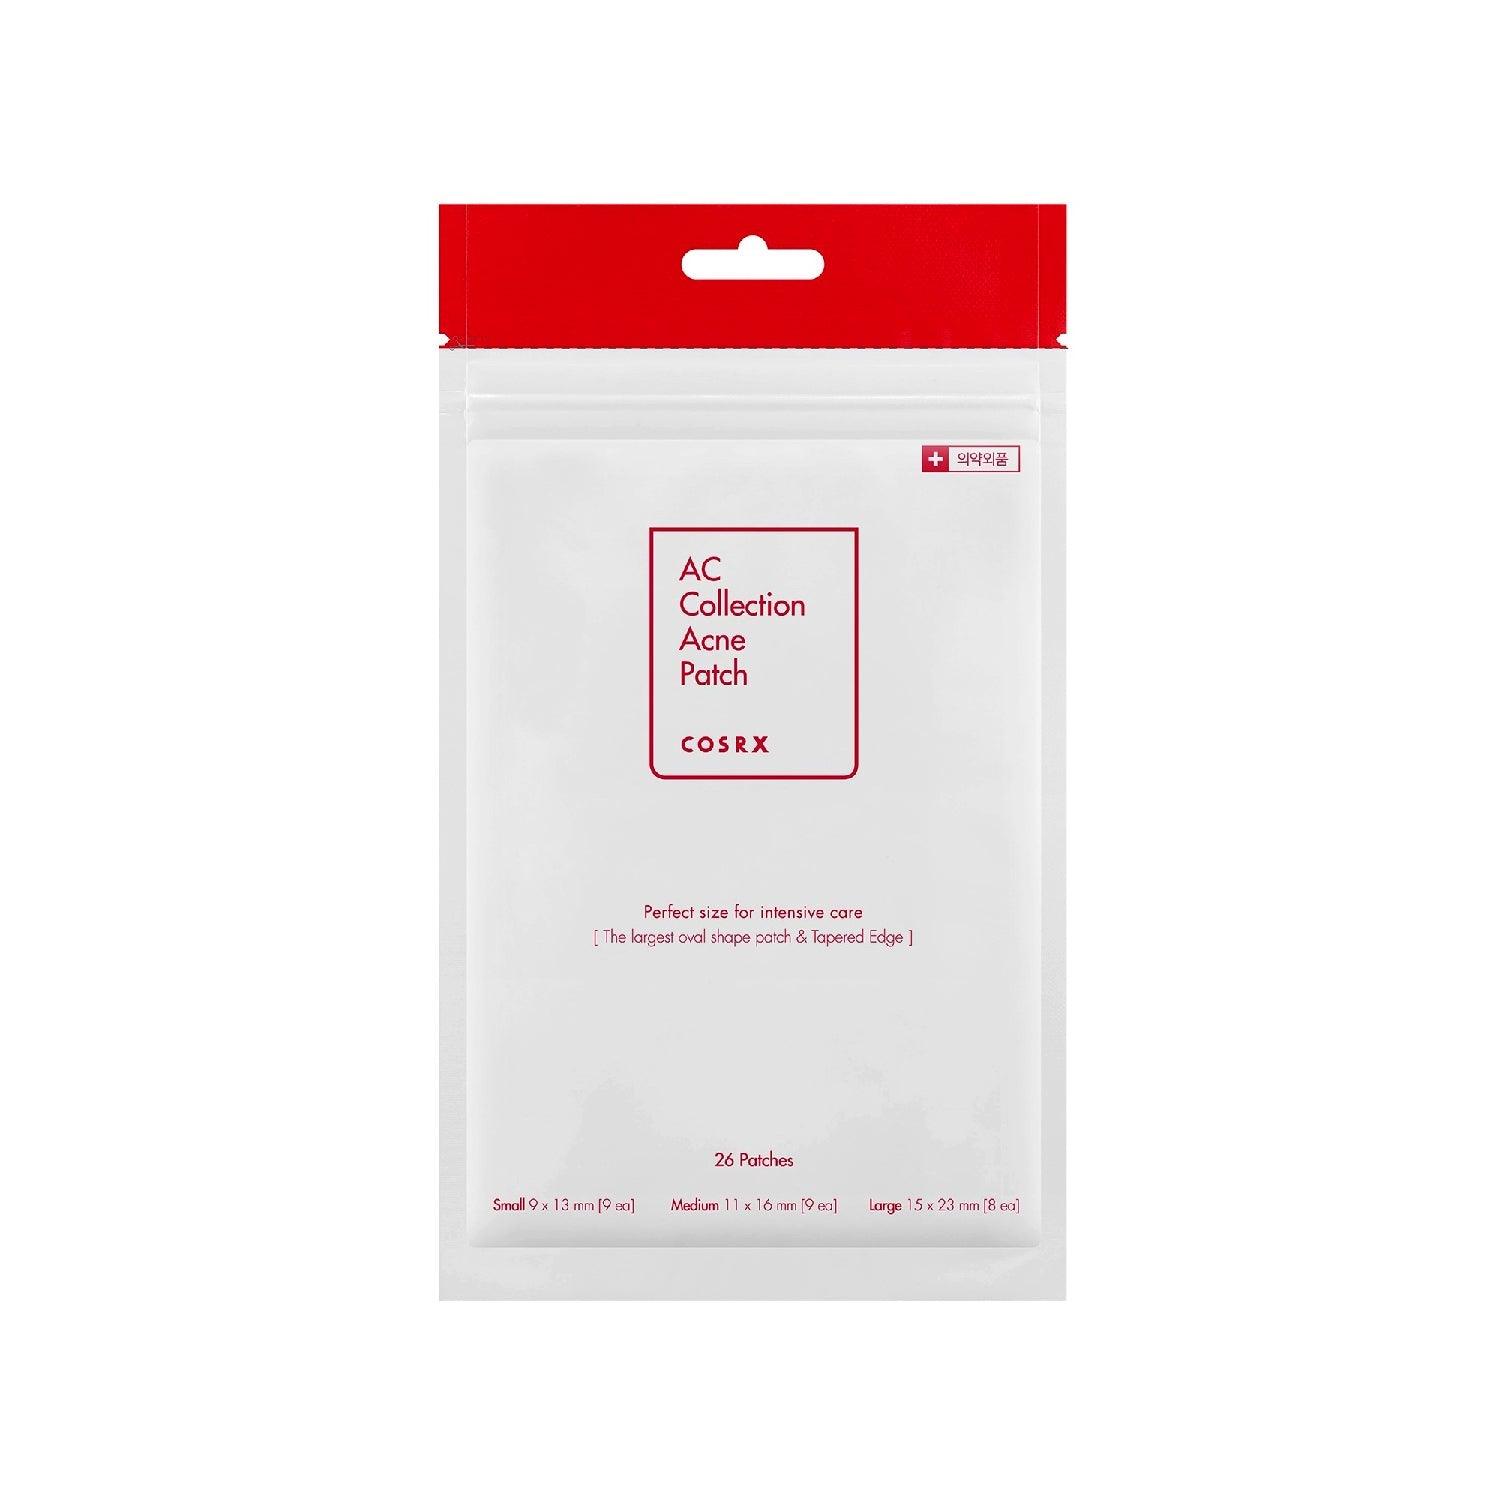 AC Collection Acne Patch - K-Beauty Arabia